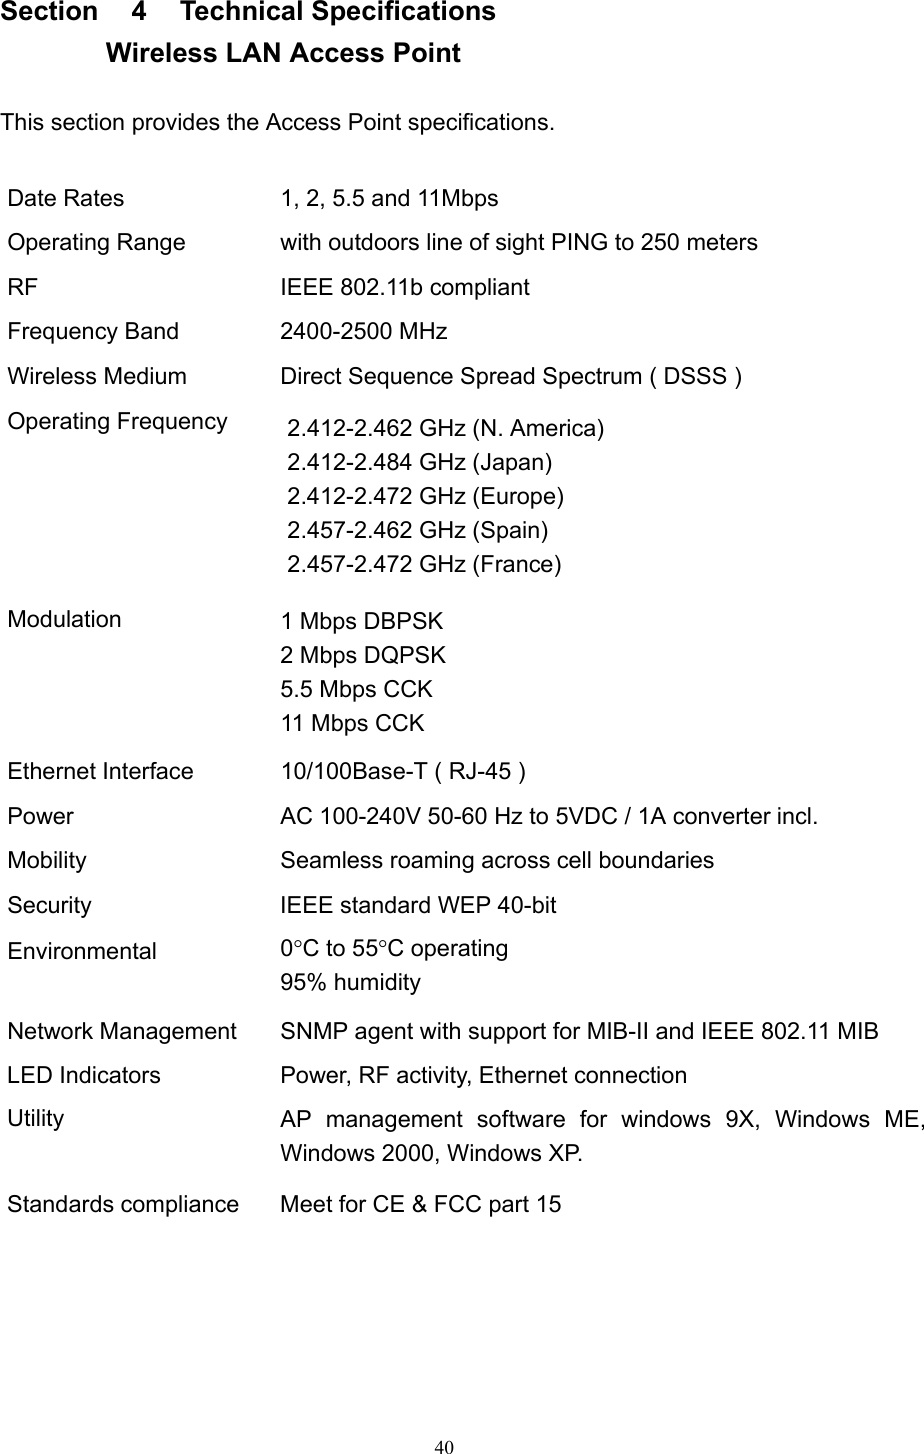   40 Section  4  Technical Specifications  Wireless LAN Access Point  This section provides the Access Point specifications.  Date Rates  1, 2, 5.5 and 11Mbps Operating Range  with outdoors line of sight PING to 250 meters RF    IEEE 802.11b compliant Frequency Band  2400-2500 MHz Wireless Medium  Direct Sequence Spread Spectrum ( DSSS ) Operating Frequency  2.412-2.462 GHz (N. America) 2.412-2.484 GHz (Japan) 2.412-2.472 GHz (Europe) 2.457-2.462 GHz (Spain) 2.457-2.472 GHz (France) Modulation  1 Mbps DBPSK 2 Mbps DQPSK 5.5 Mbps CCK 11 Mbps CCK Ethernet Interface  10/100Base-T ( RJ-45 ) Power  AC 100-240V 50-60 Hz to 5VDC / 1A converter incl. Mobility  Seamless roaming across cell boundaries Security  IEEE standard WEP 40-bit Environmental  0°C to 55°C operating 95% humidity Network Management  SNMP agent with support for MIB-II and IEEE 802.11 MIB LED Indicators  Power, RF activity, Ethernet connection   Utility  AP management software for windows 9X, Windows ME, Windows 2000, Windows XP. Standards compliance  Meet for CE &amp; FCC part 15      